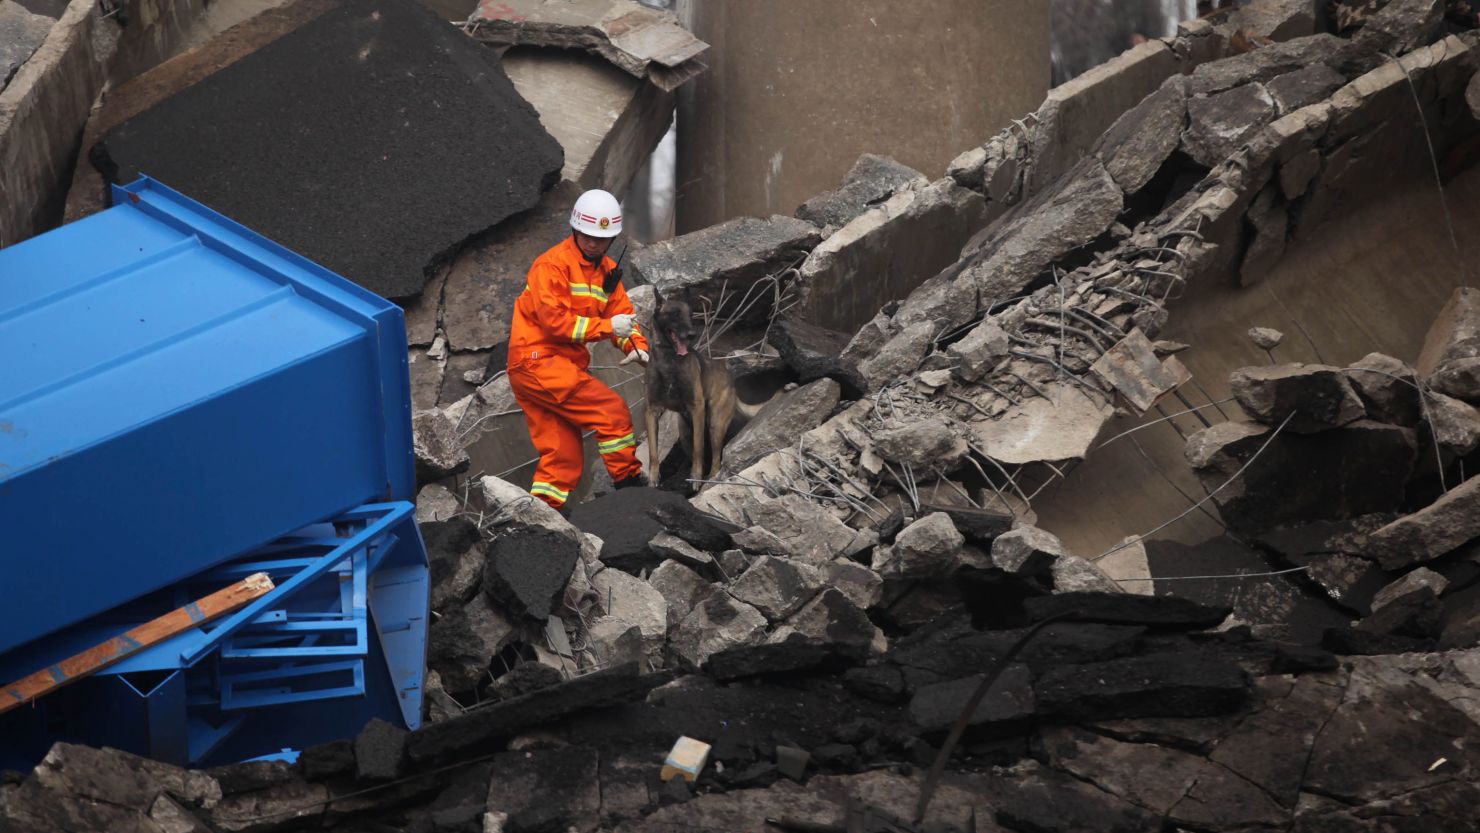 A rescuer looks for survivors at the scene near the city of Sanmenxia, Henan province, on February 1, 2013.